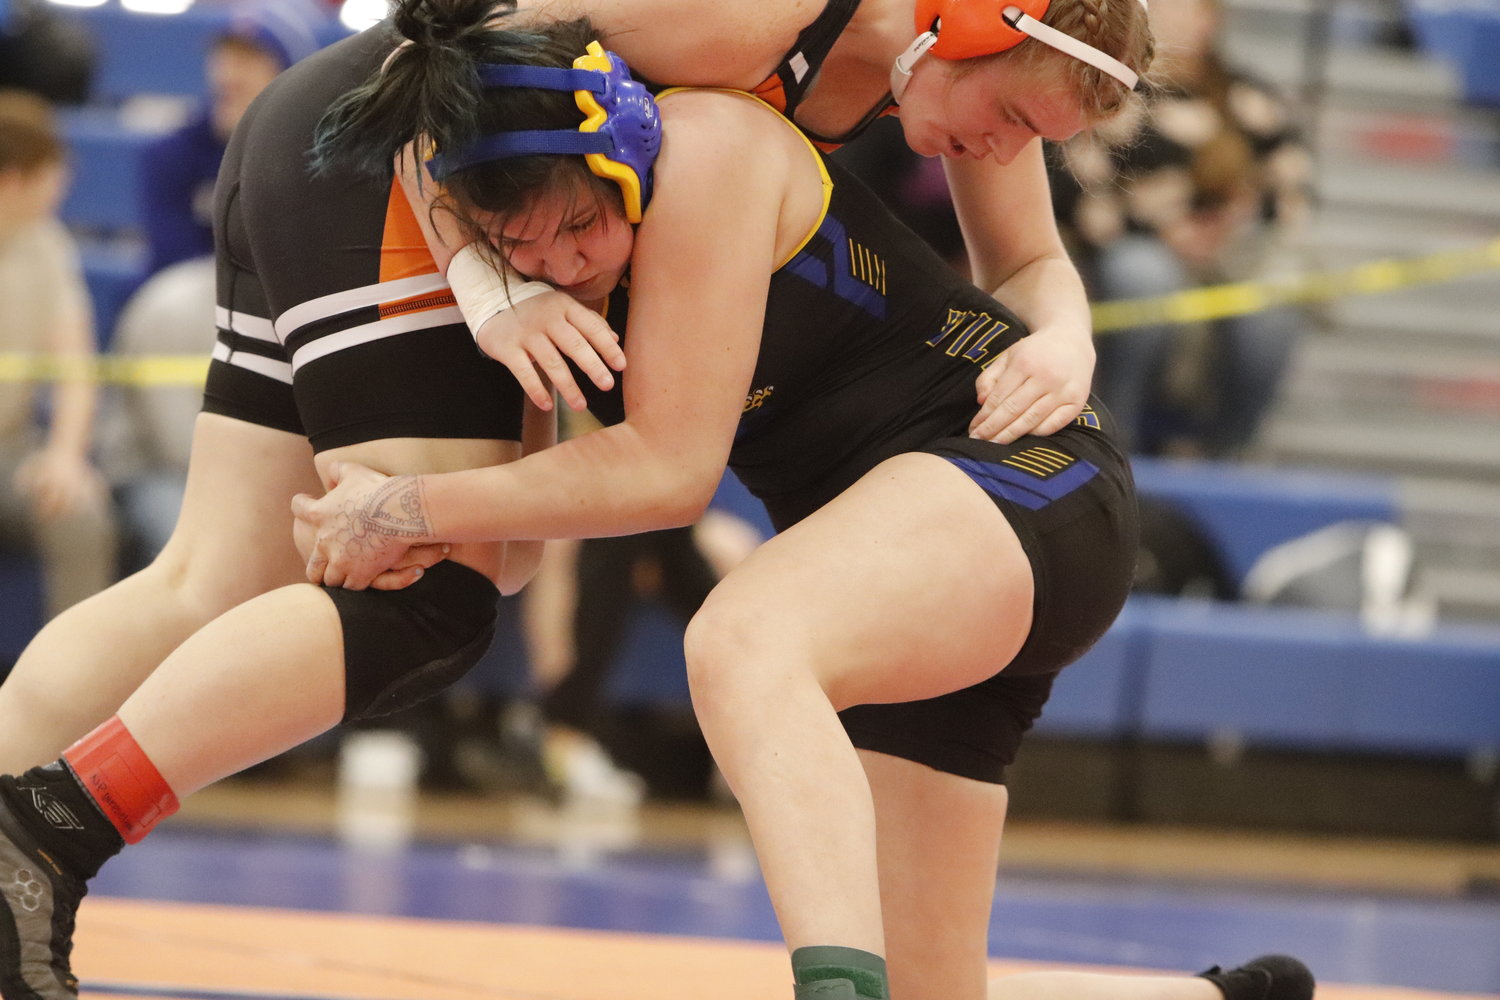 Wright City sophomore Caelyn Hanff (right) wrestles against Maddisyn Crawford of Kirksville during Saturday's district tournament. Hanff won the match and placed first in her weight class.